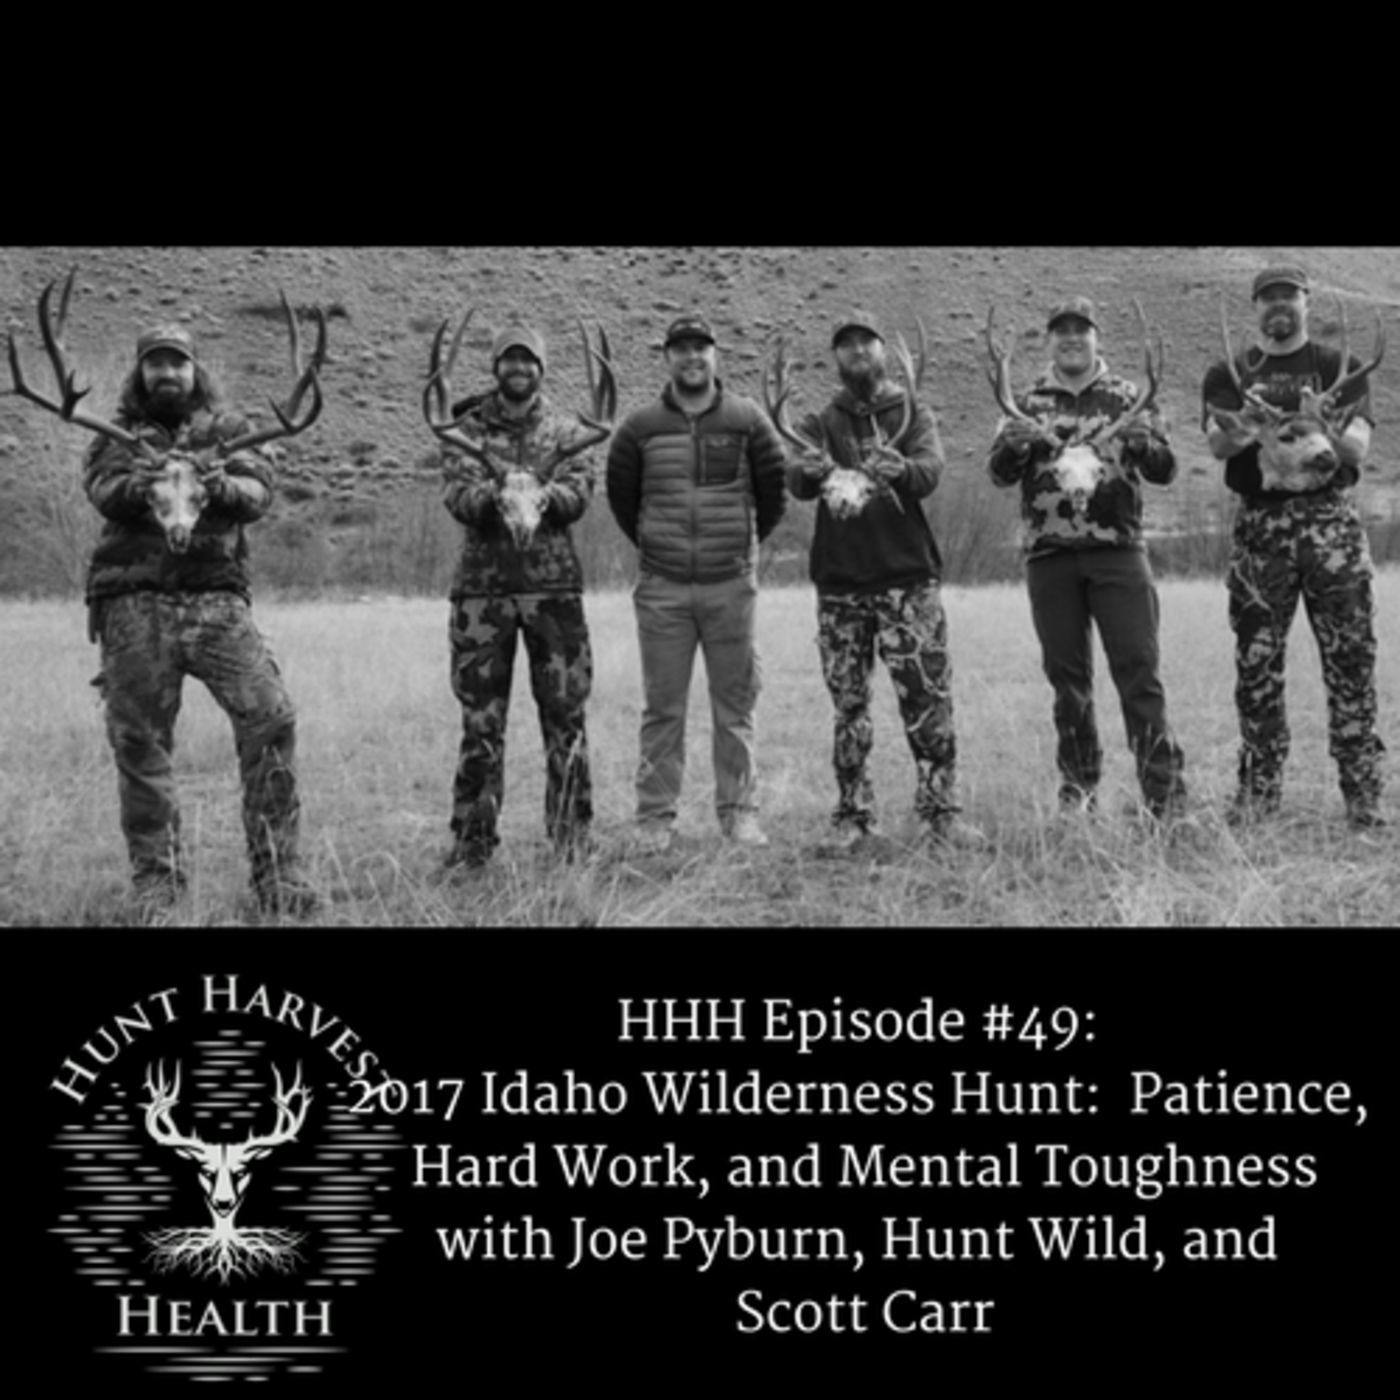 Episode #49:  2017 Idaho Wilderness Hunt - Patience, Hard Work, and Mental Toughness with Joe Pyburn, Hunt Wild, and Scott Carr